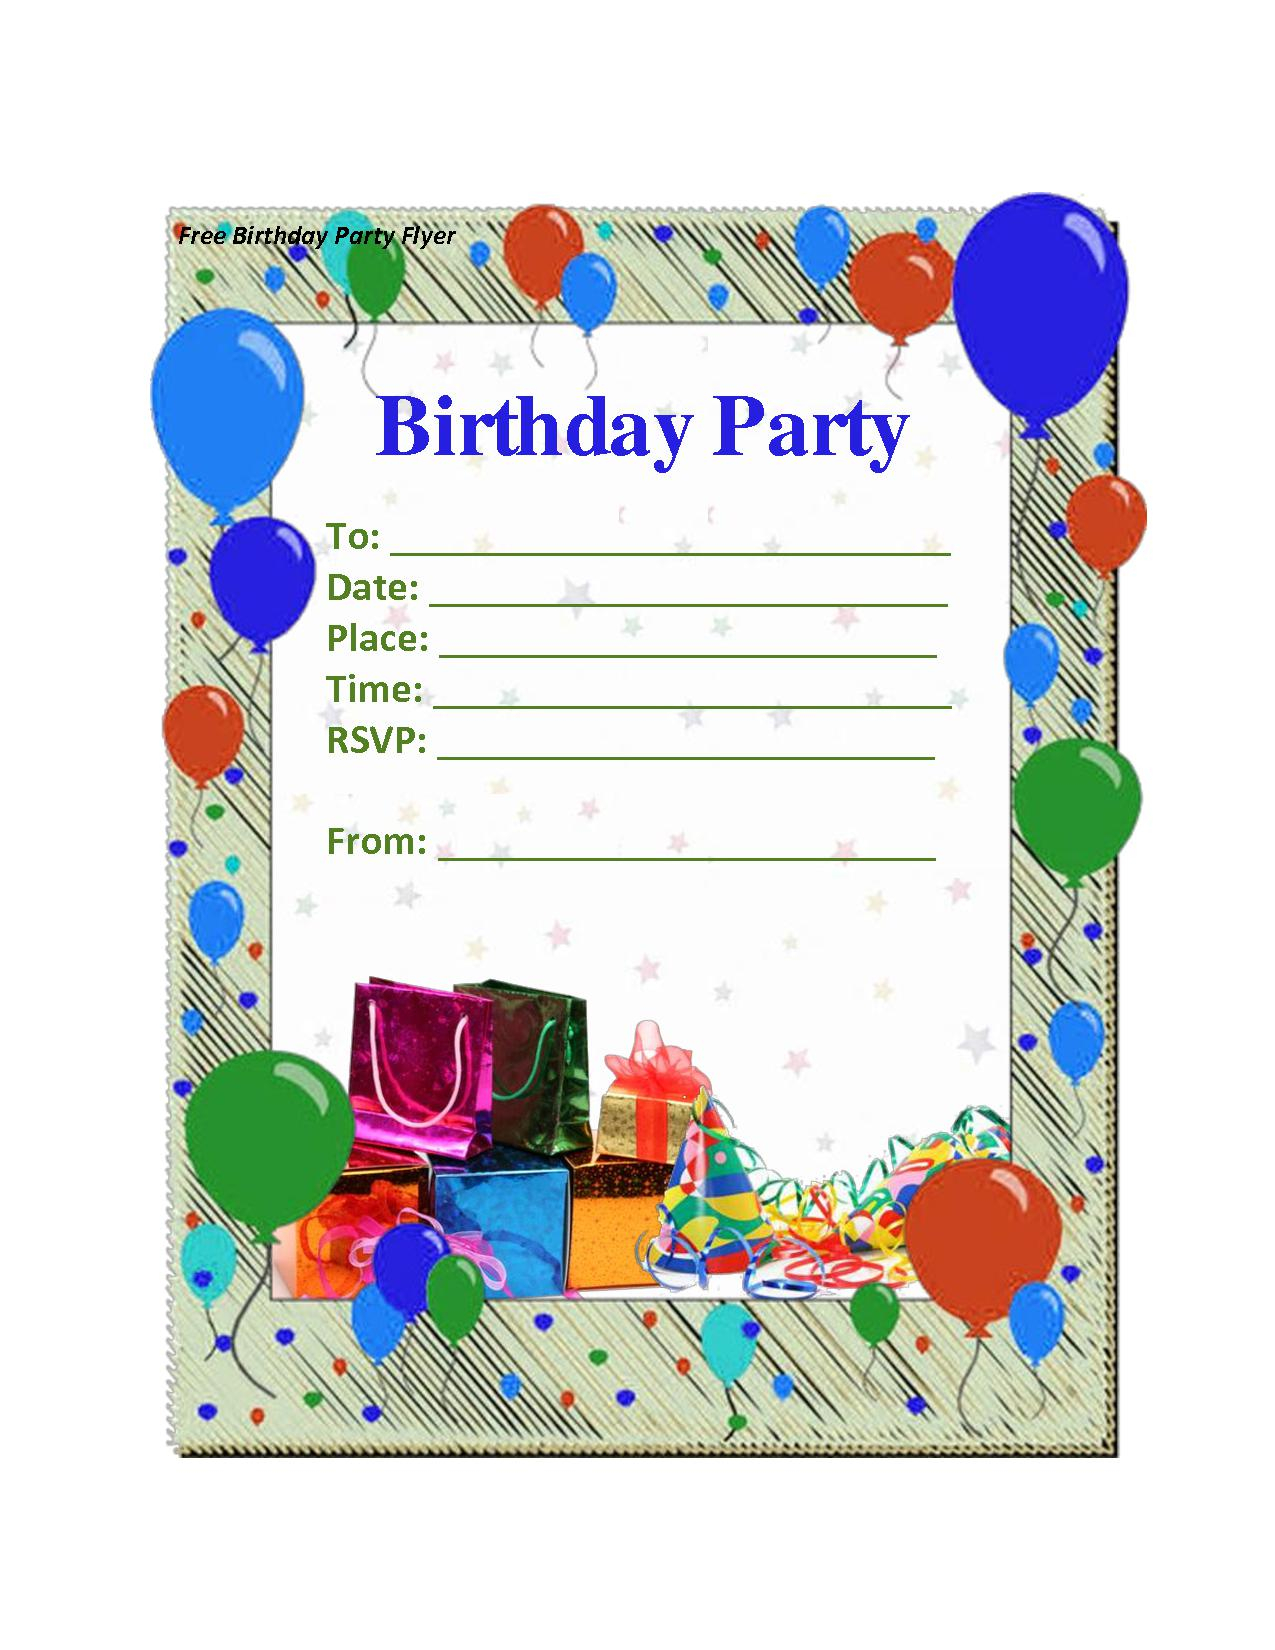 Birthday Party Invitation Maker Free Birthday Invitation Examples with regard to dimensions 1275 X 1650